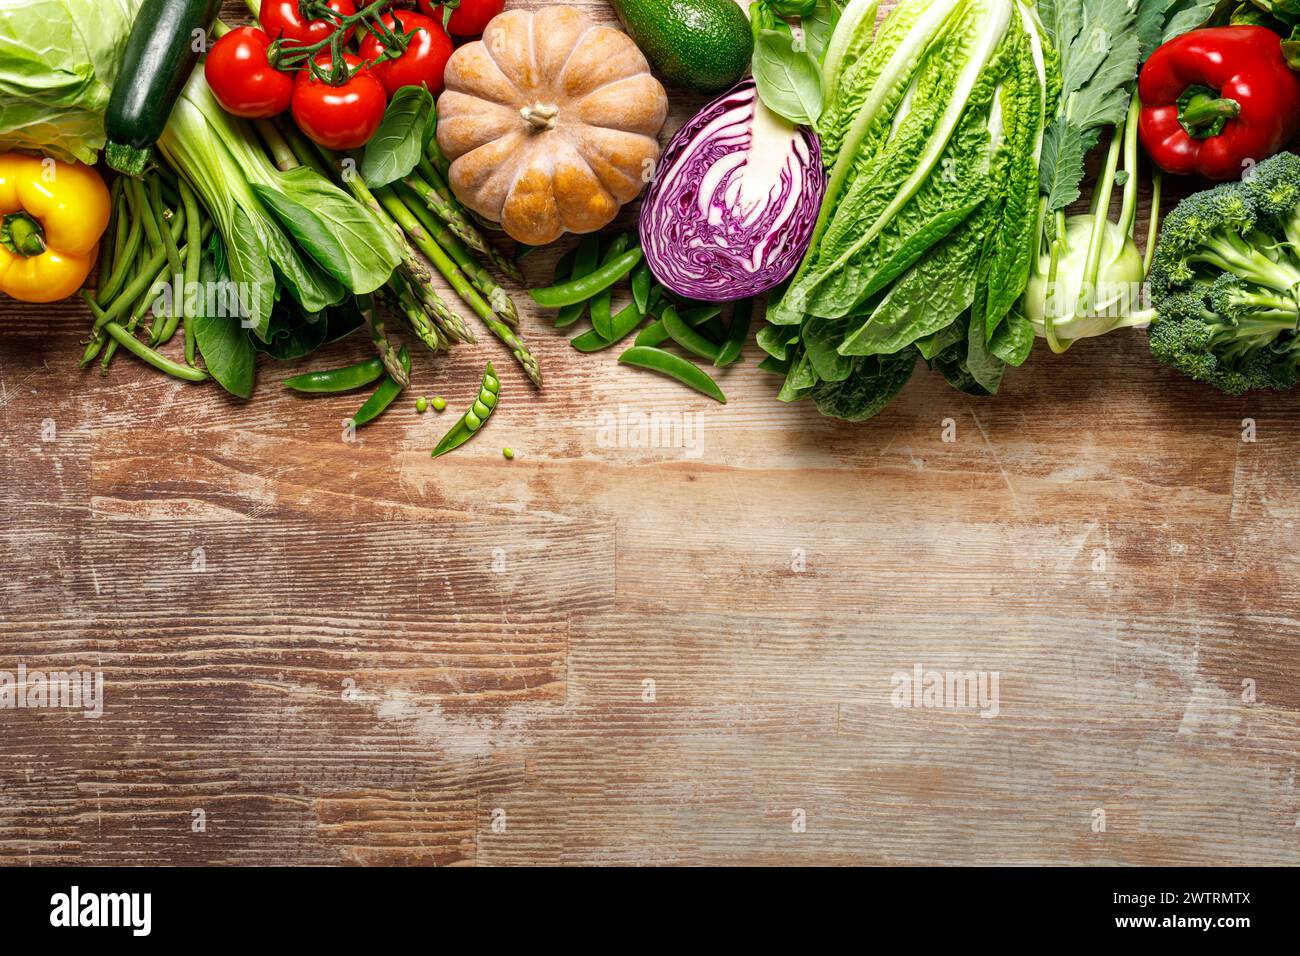 Vegetables background. Various vegetables on kitchen table. Clean eating, healthy food concept, flat lay, top down view Stock Photo